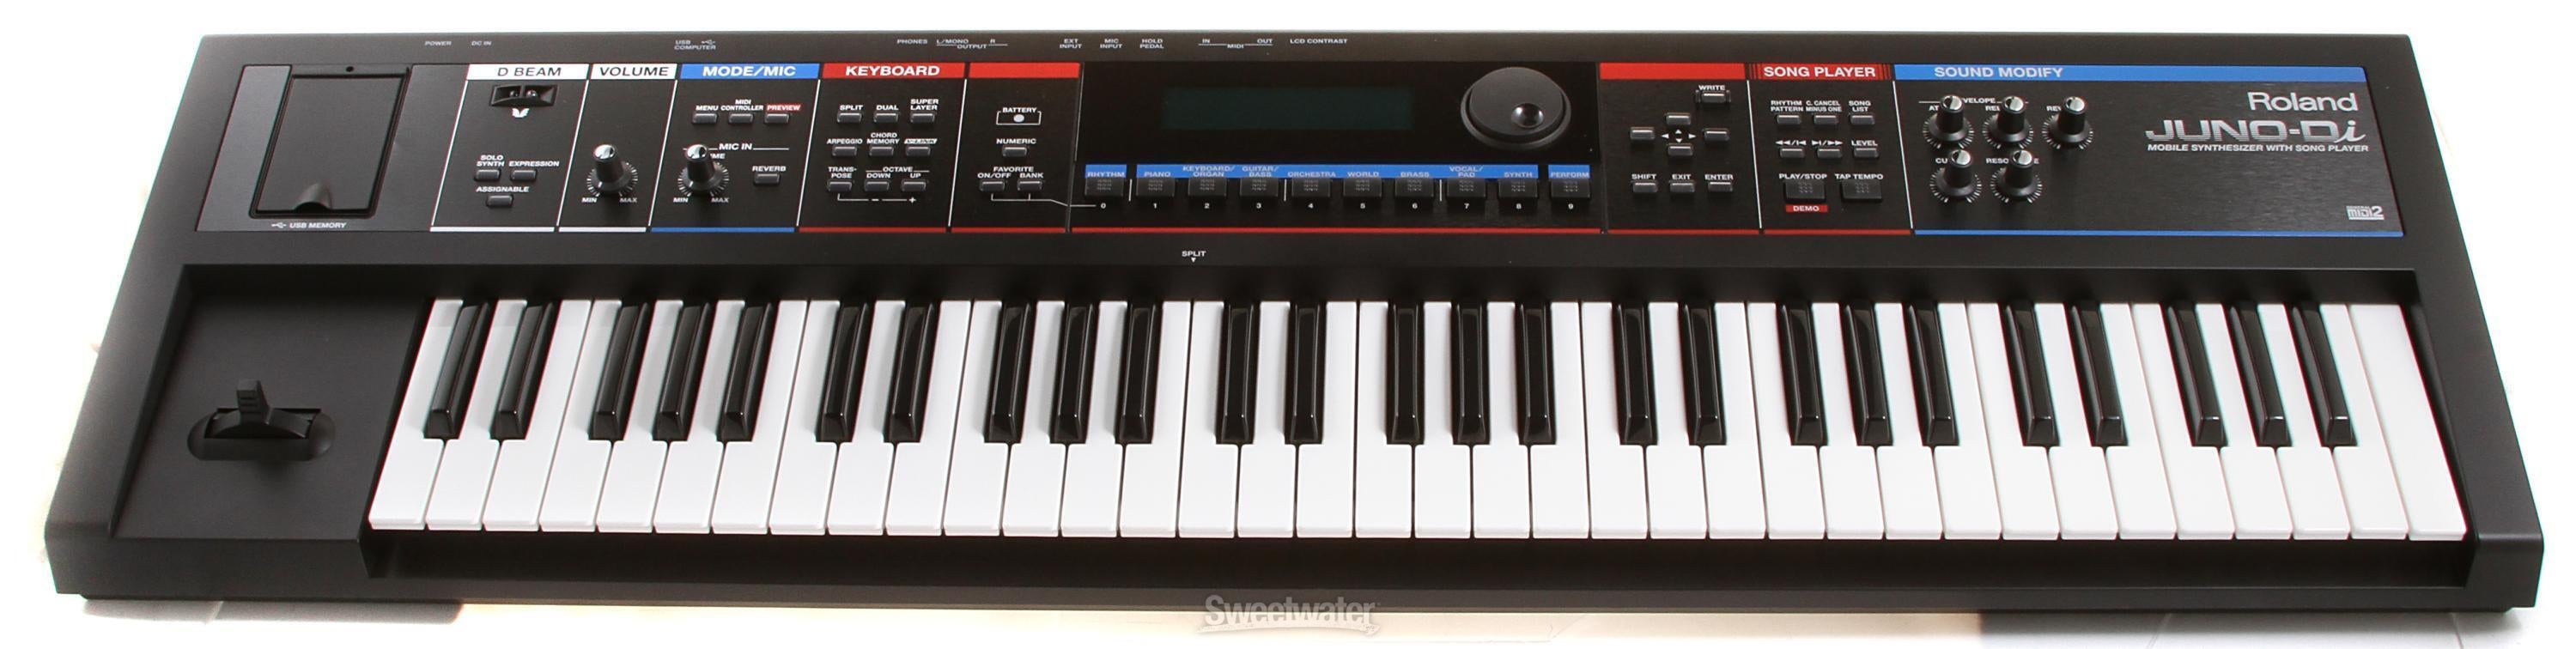 Roland JUNO-Di 61-Key Synthesizer - Black Reviews | Sweetwater